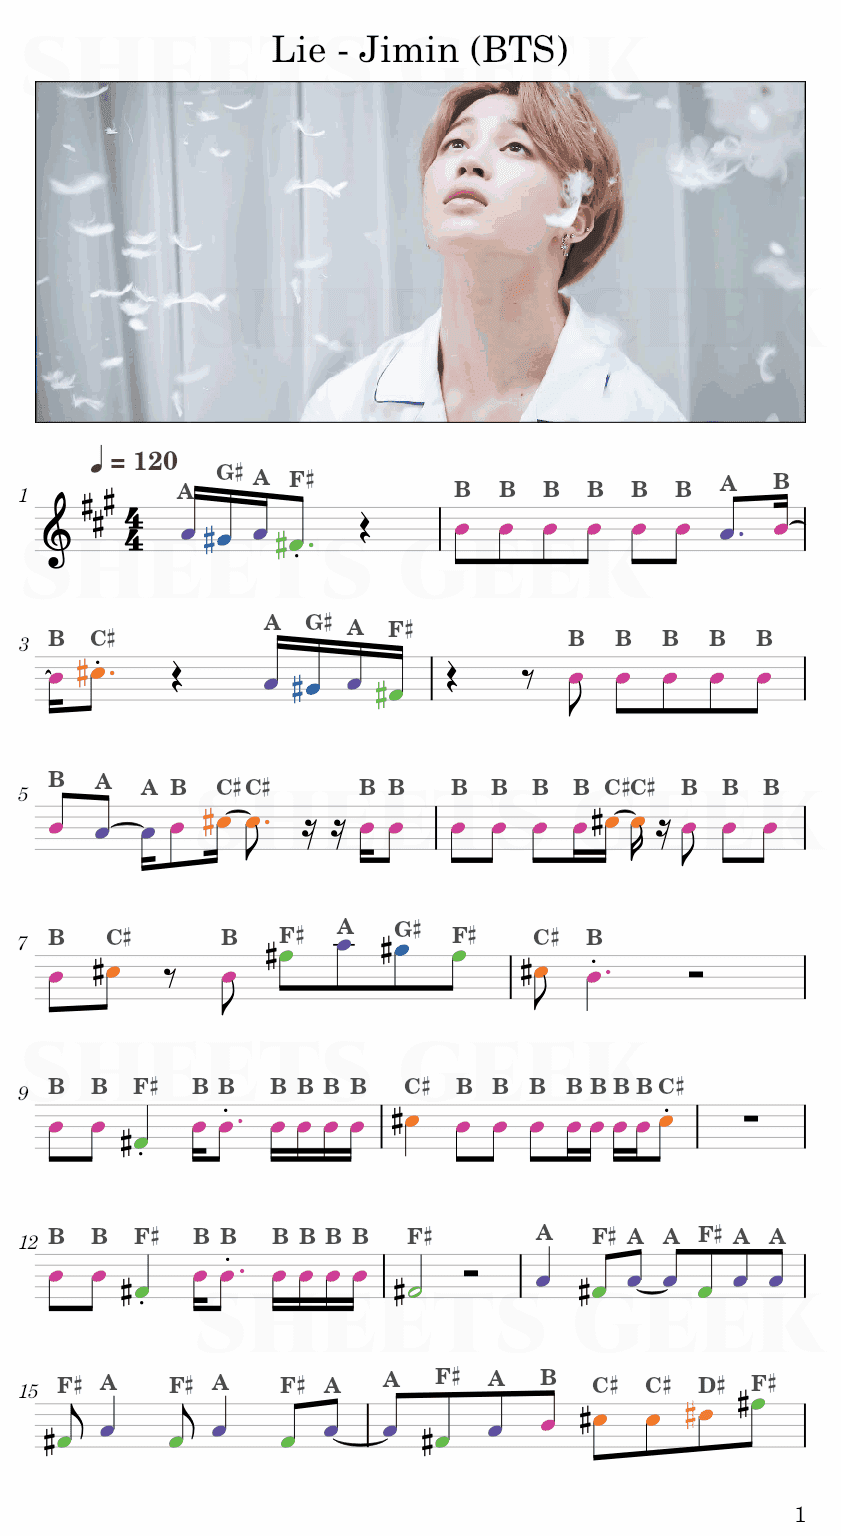 Lie - Jimin (BTS) Easy Sheet Music Free for piano, keyboard, flute, violin, sax, cello page 1